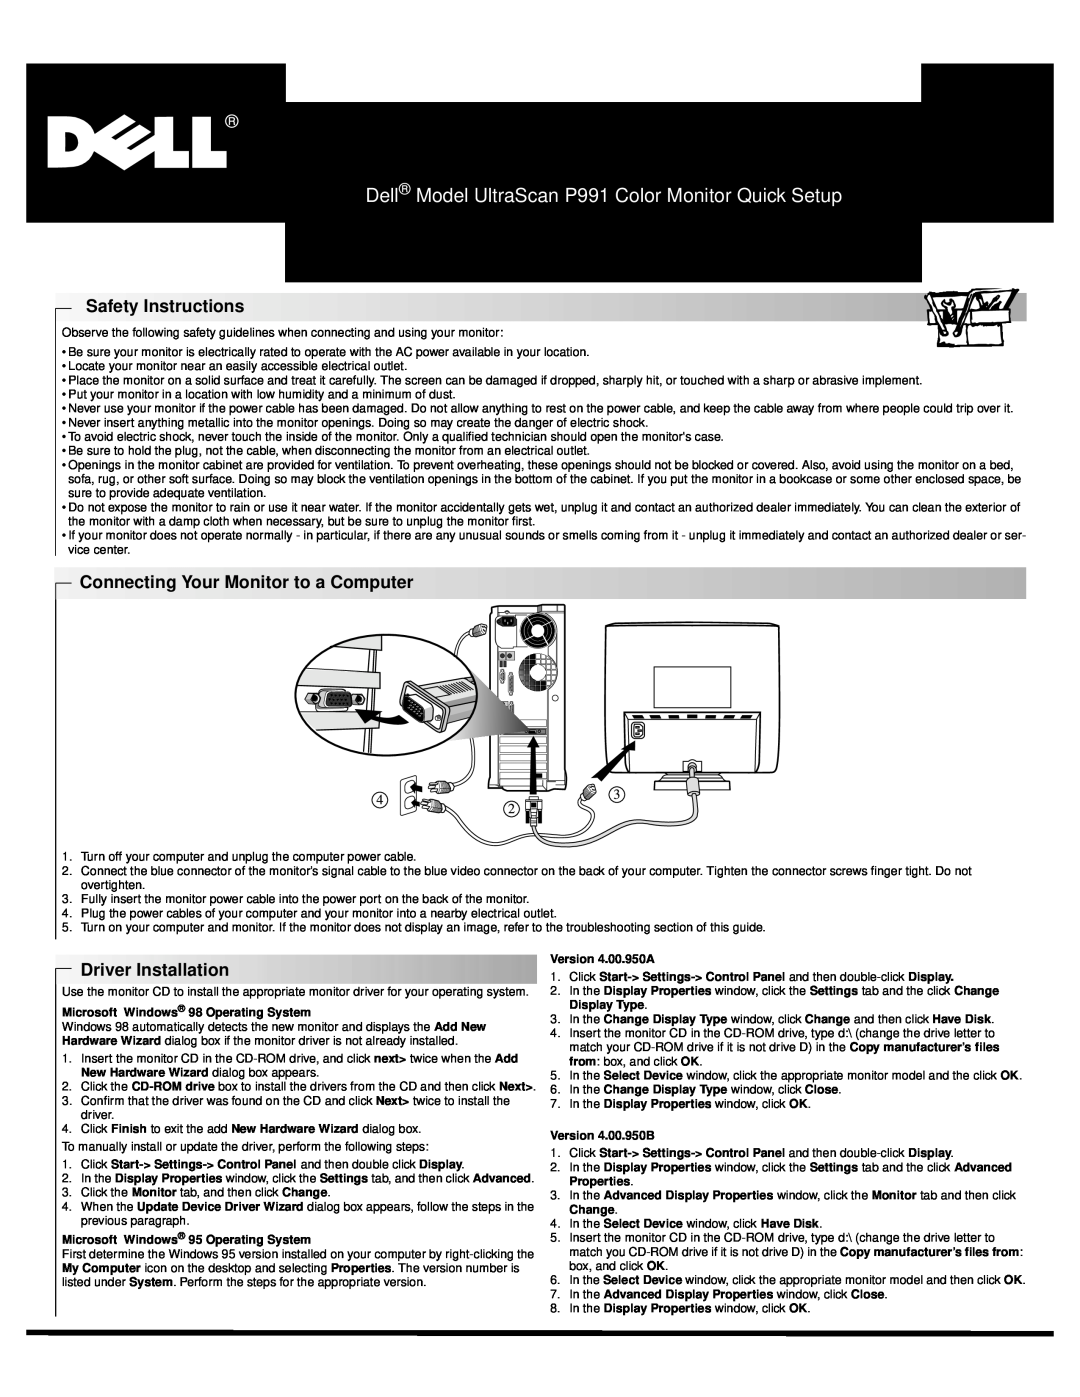 Dell 8376T, 5476T, 4476T, 2476T, P991 manual Safety Instructions, Connecting Your Monitor to a Computer, Driver Installation 